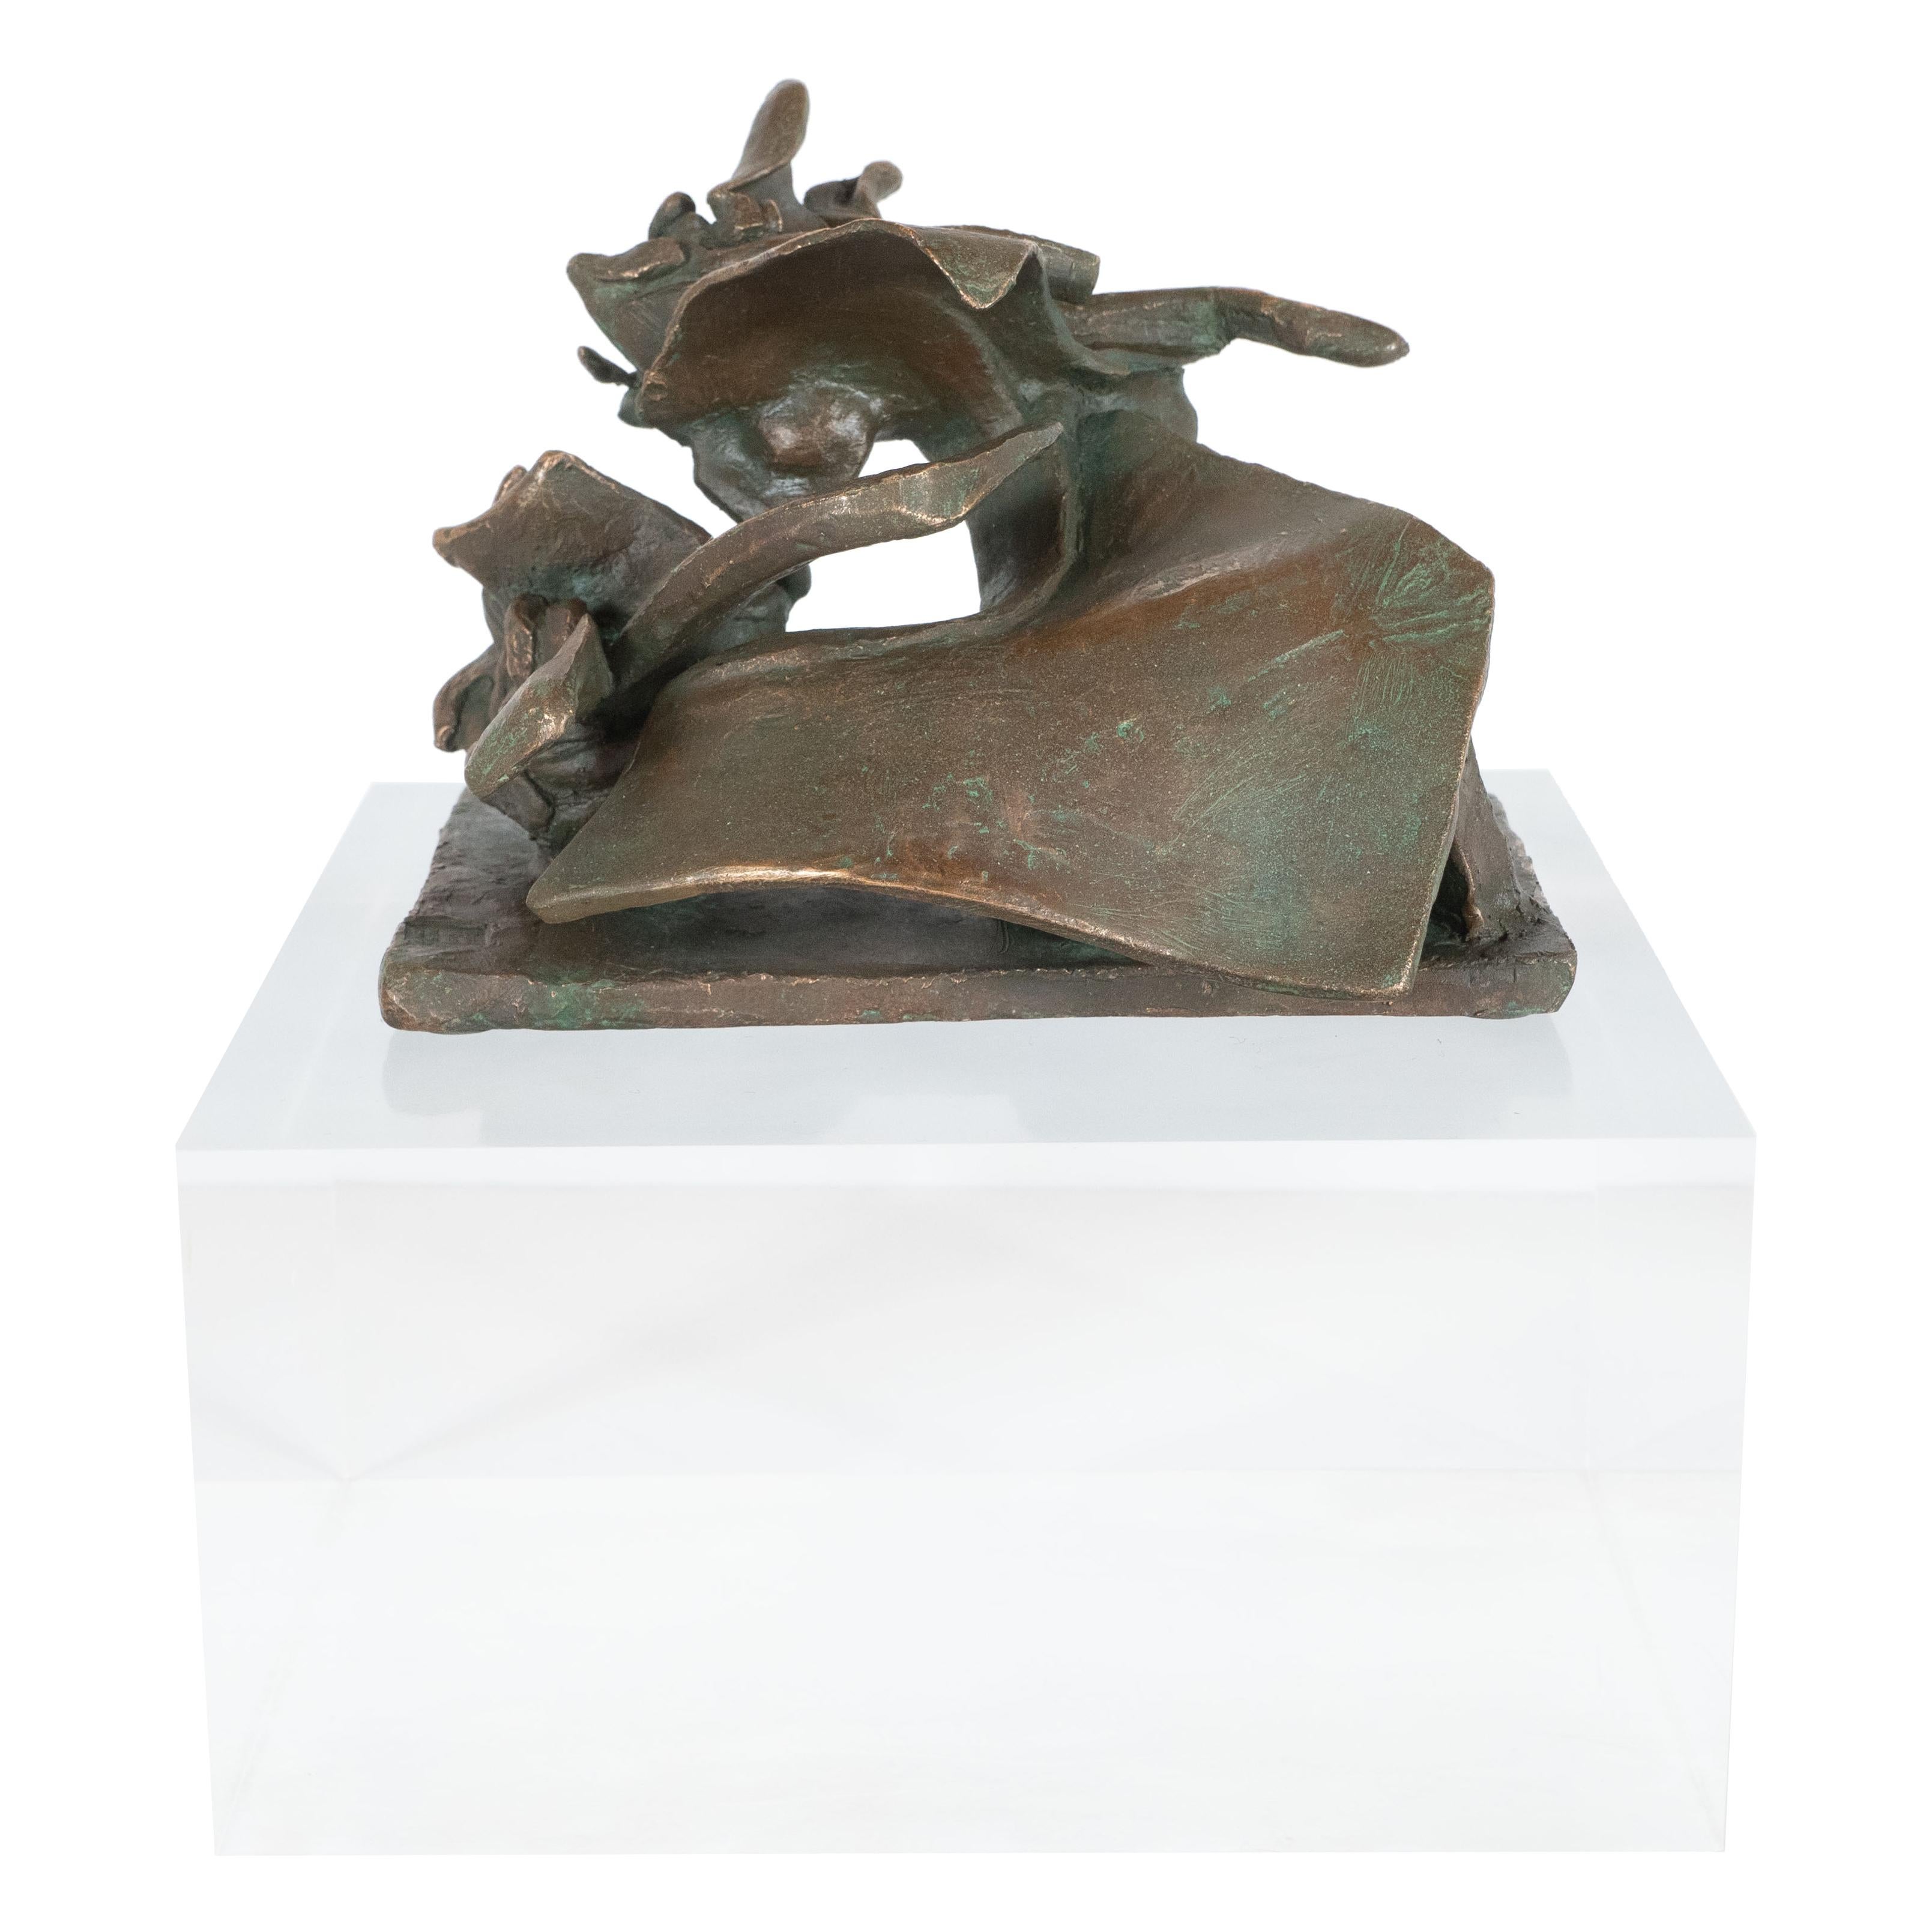 Mid-Century Modern Bronze Sculpture Entitled "Organic Shapes" by Jim Moore